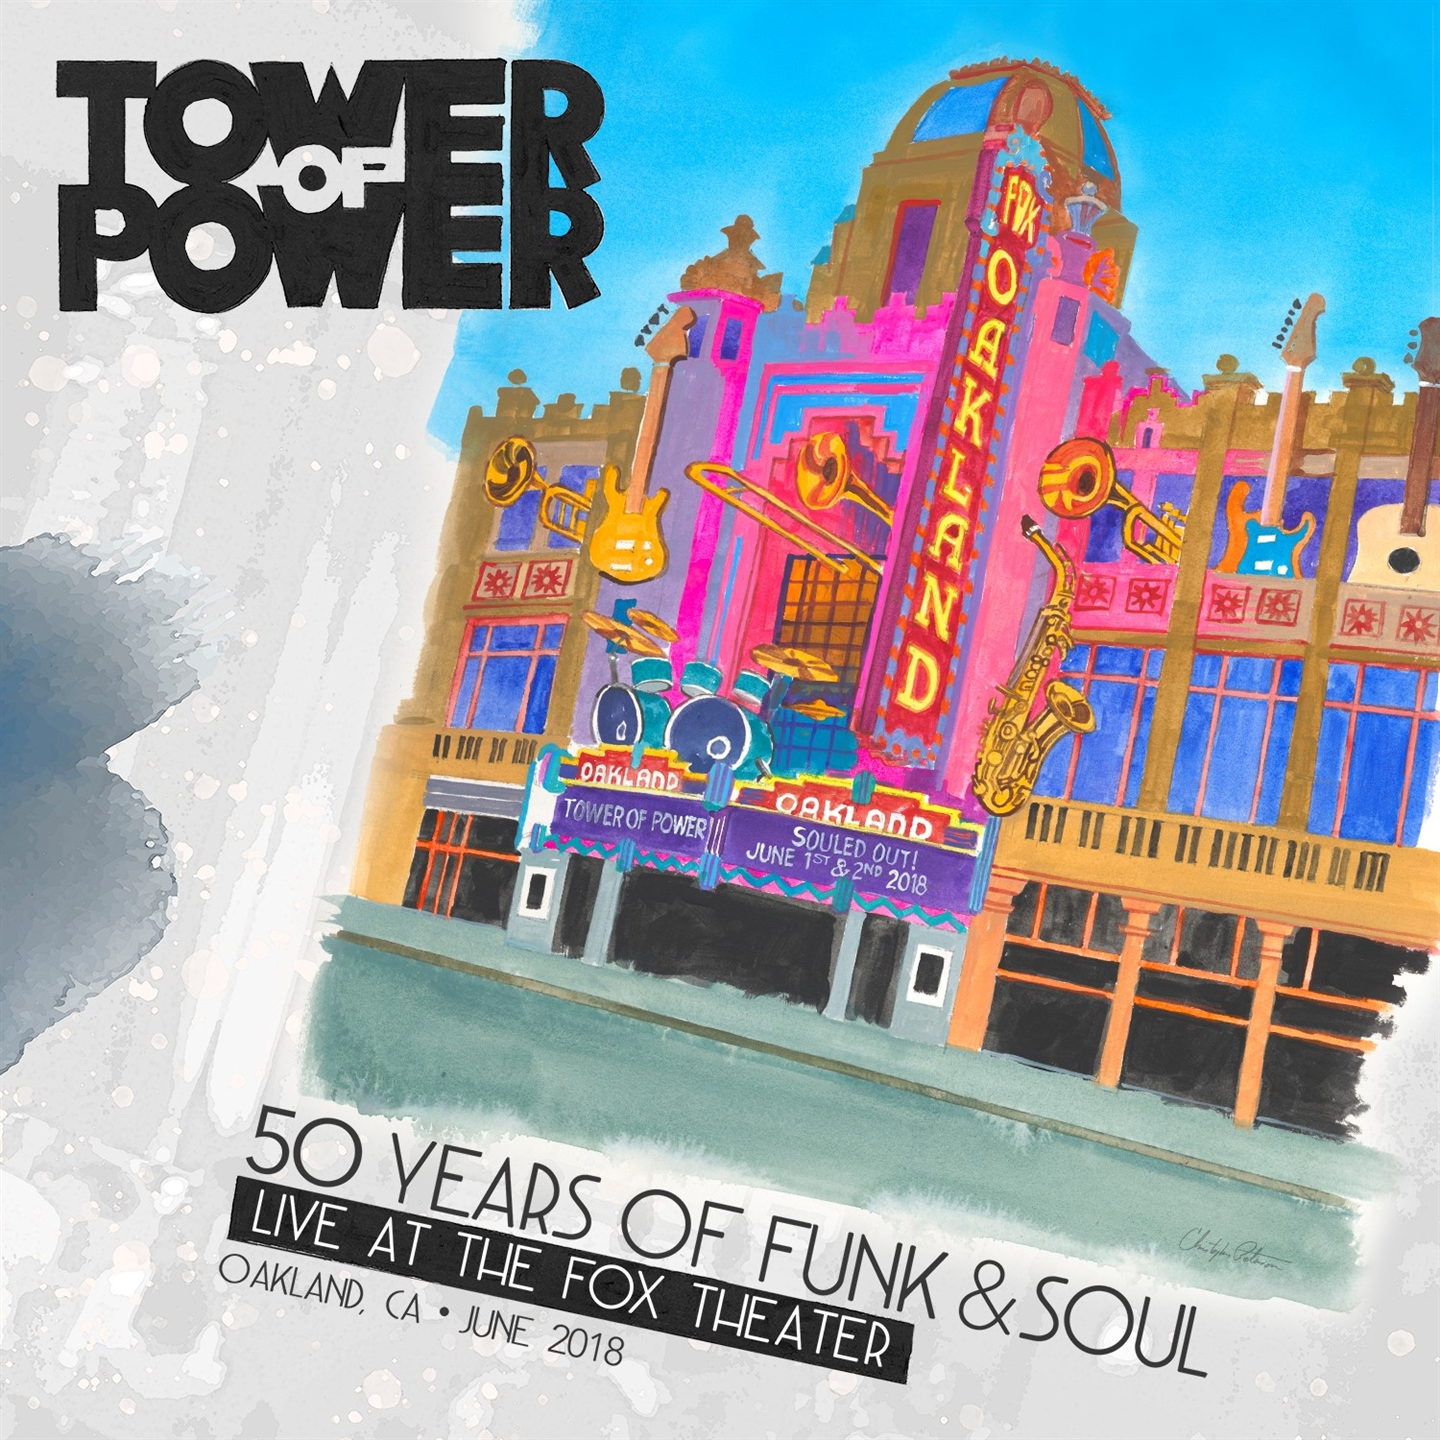 50 YEARS OF FUNK & SOUL: LIVE AT THE FOX THEATER [2 CD+DVD]